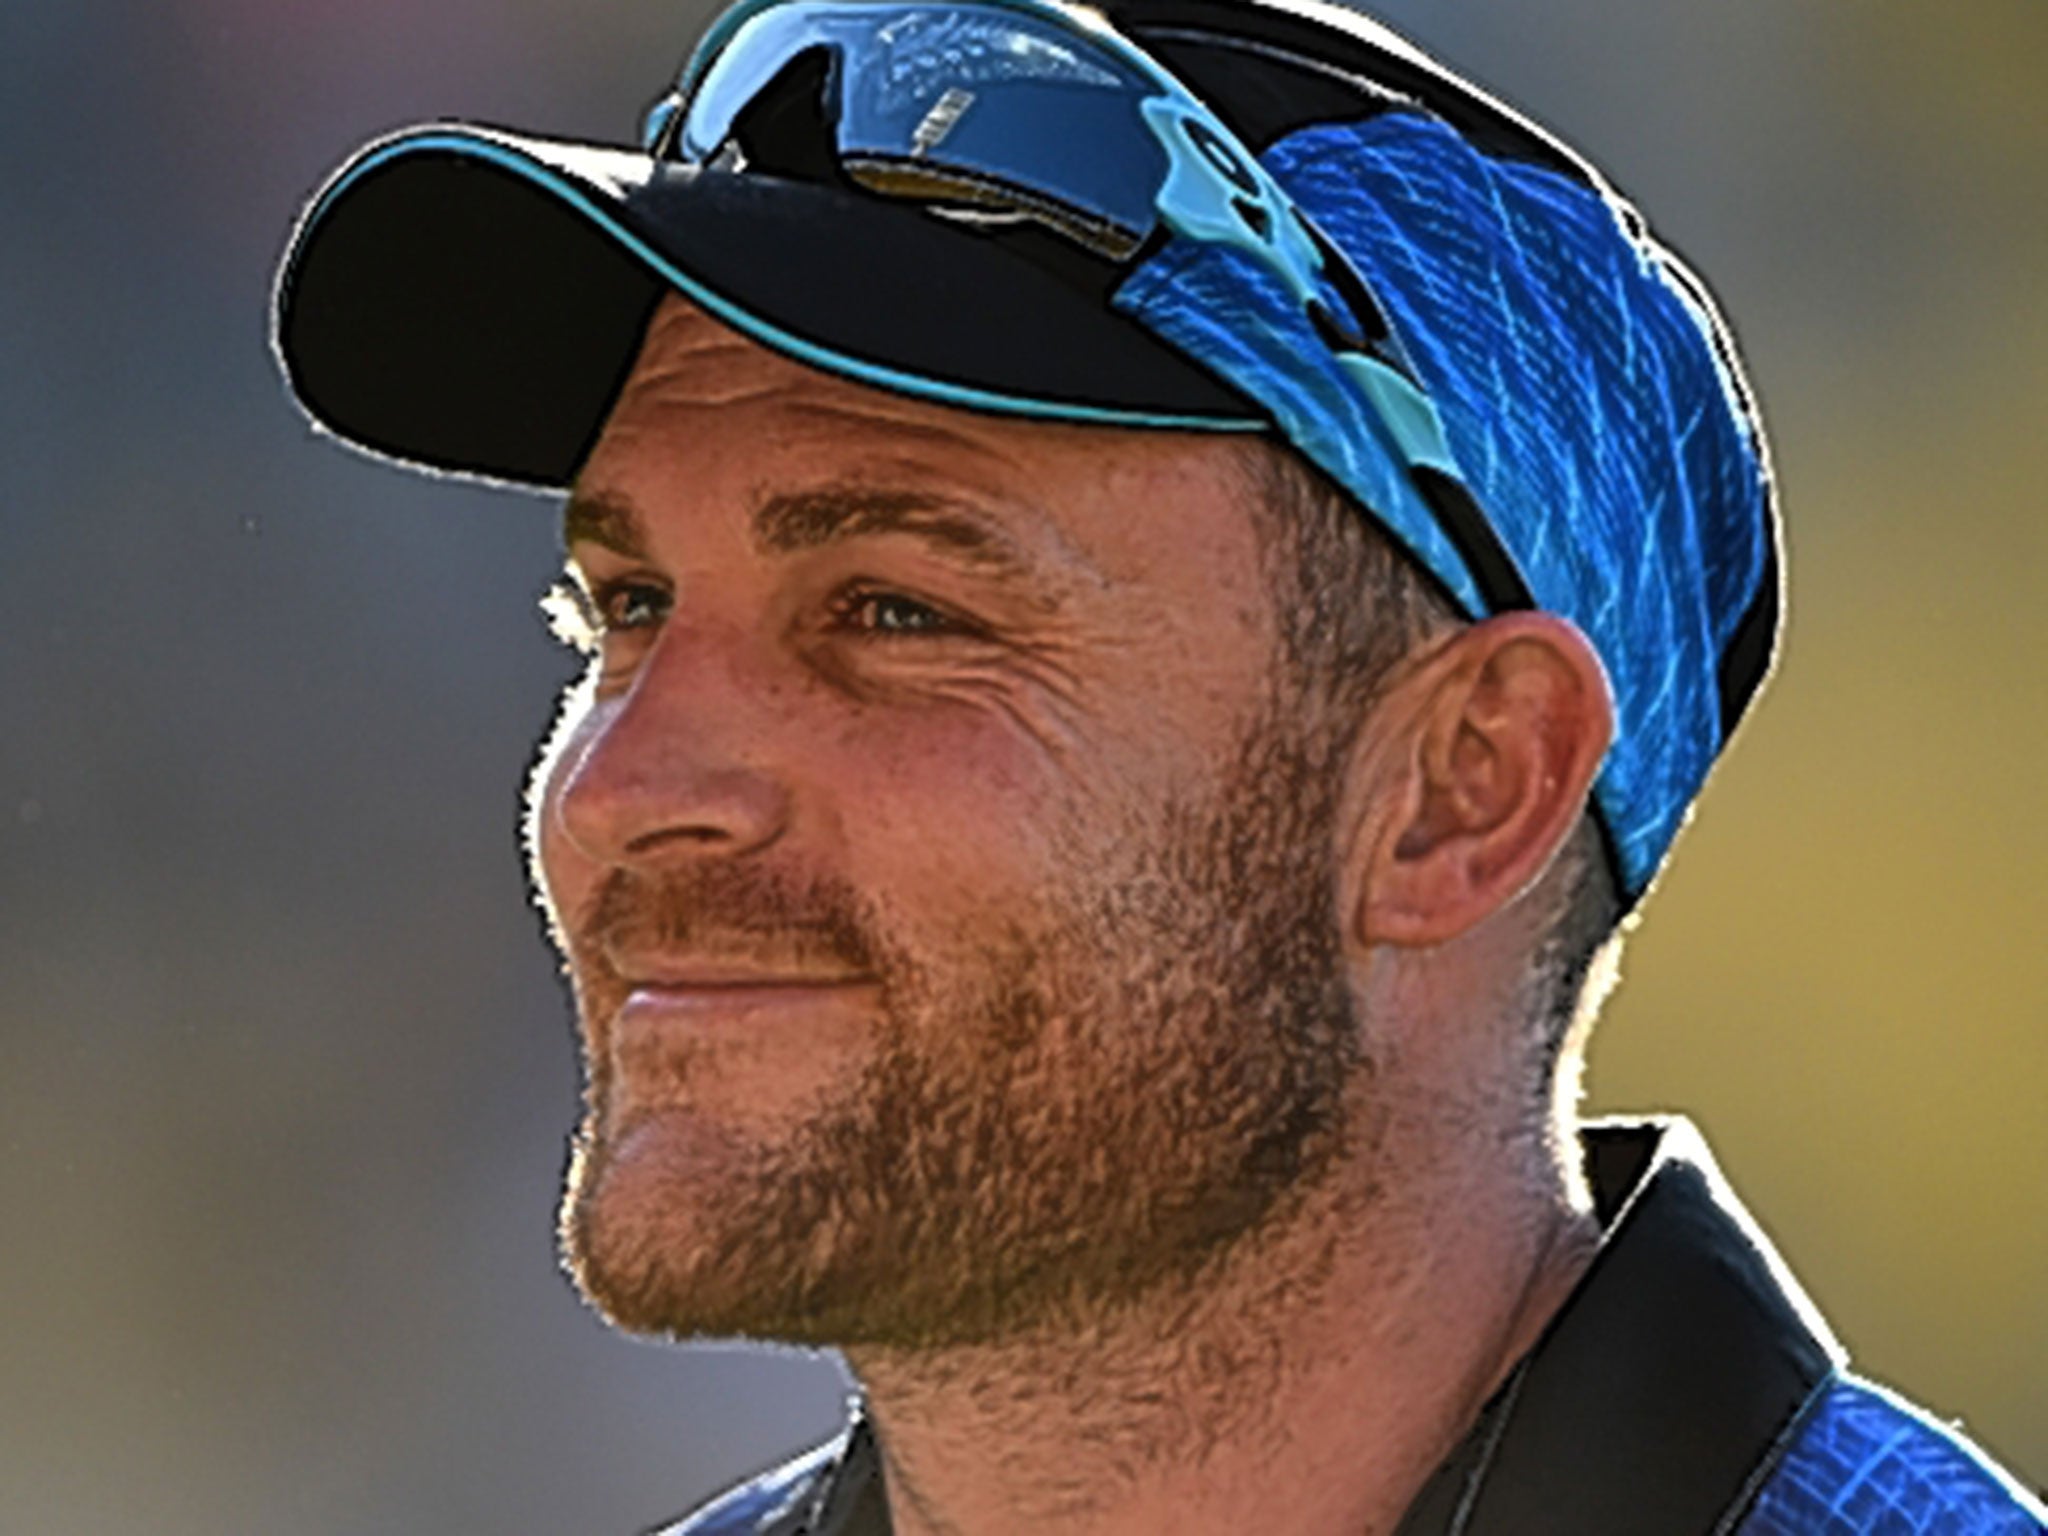 New Zealand’s Brendon McCullum has mastered the art of engendering self-belief